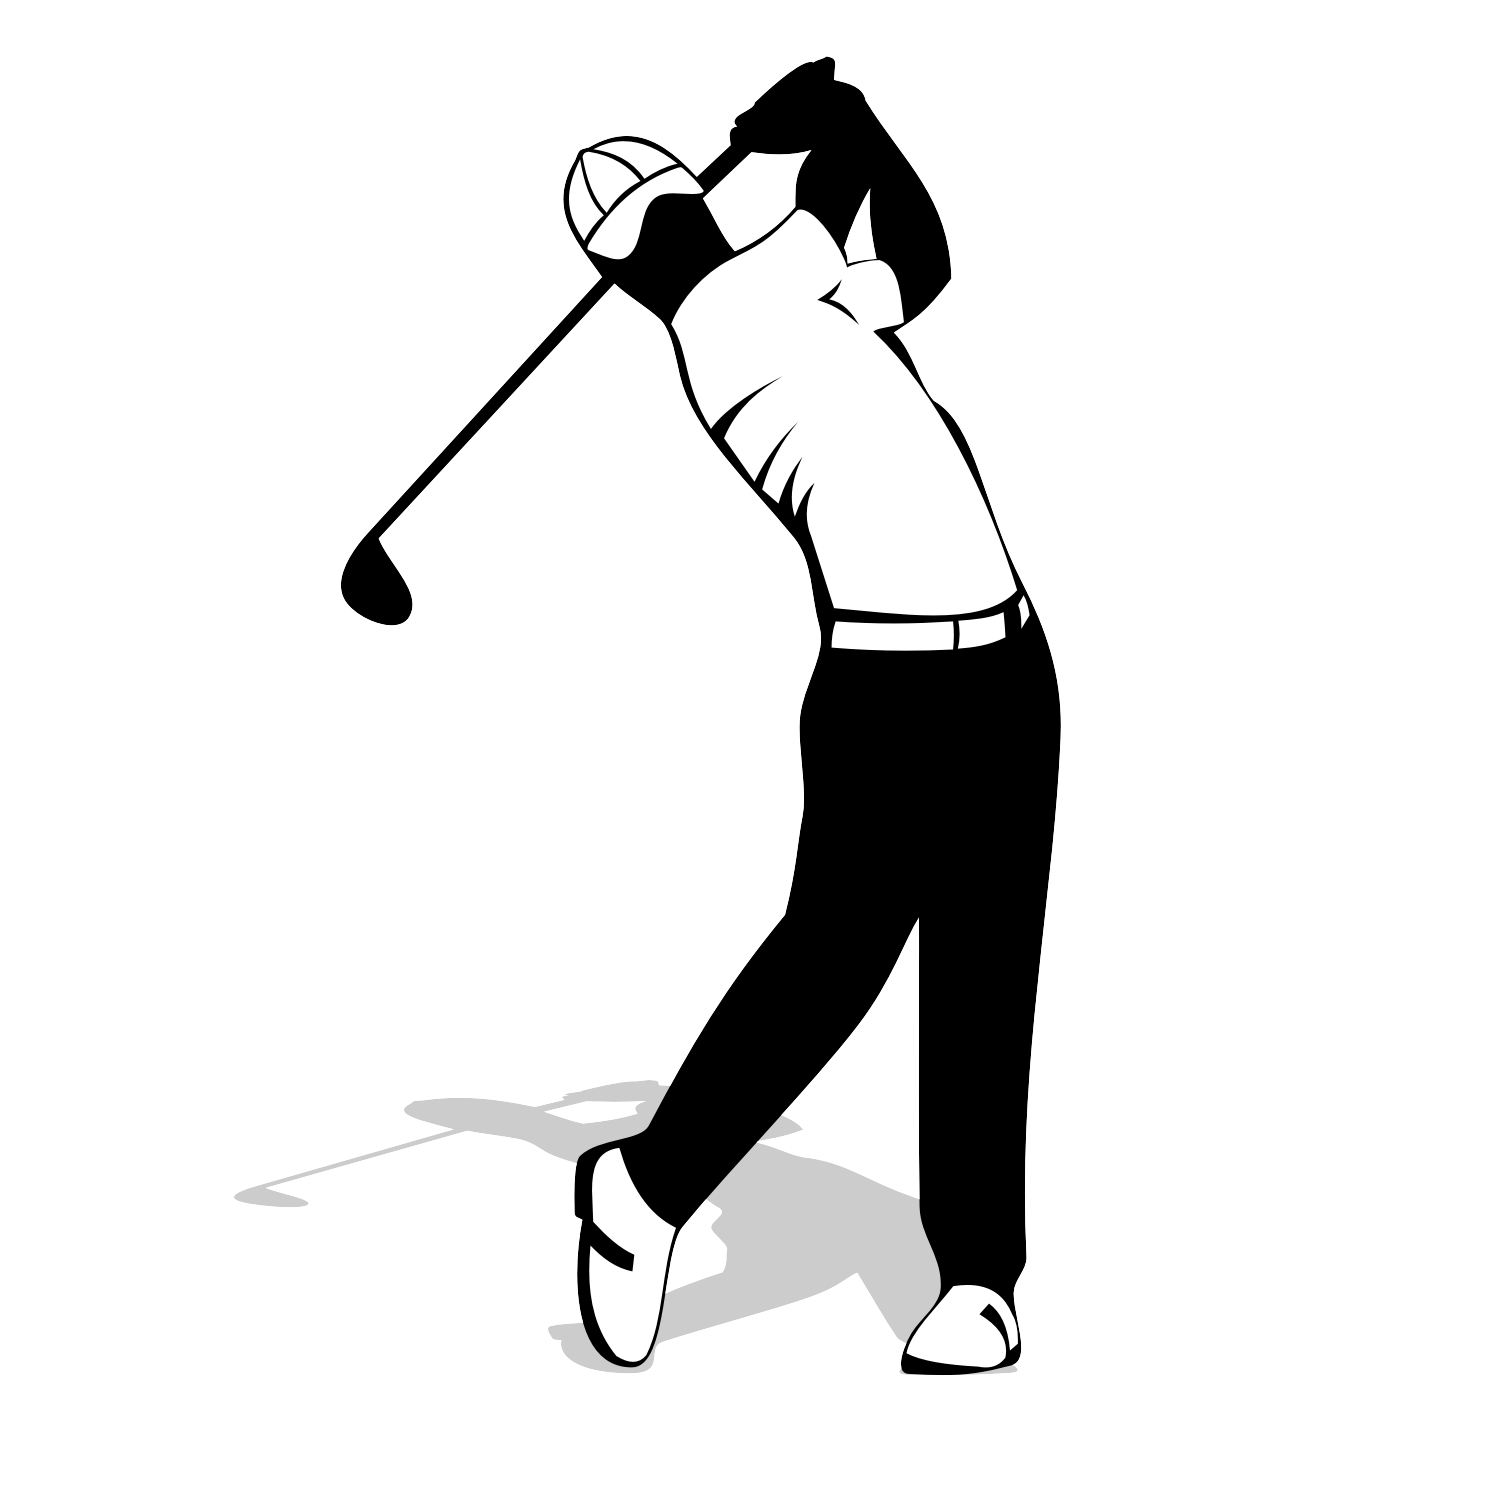 Golf Illustrations - Clipart library